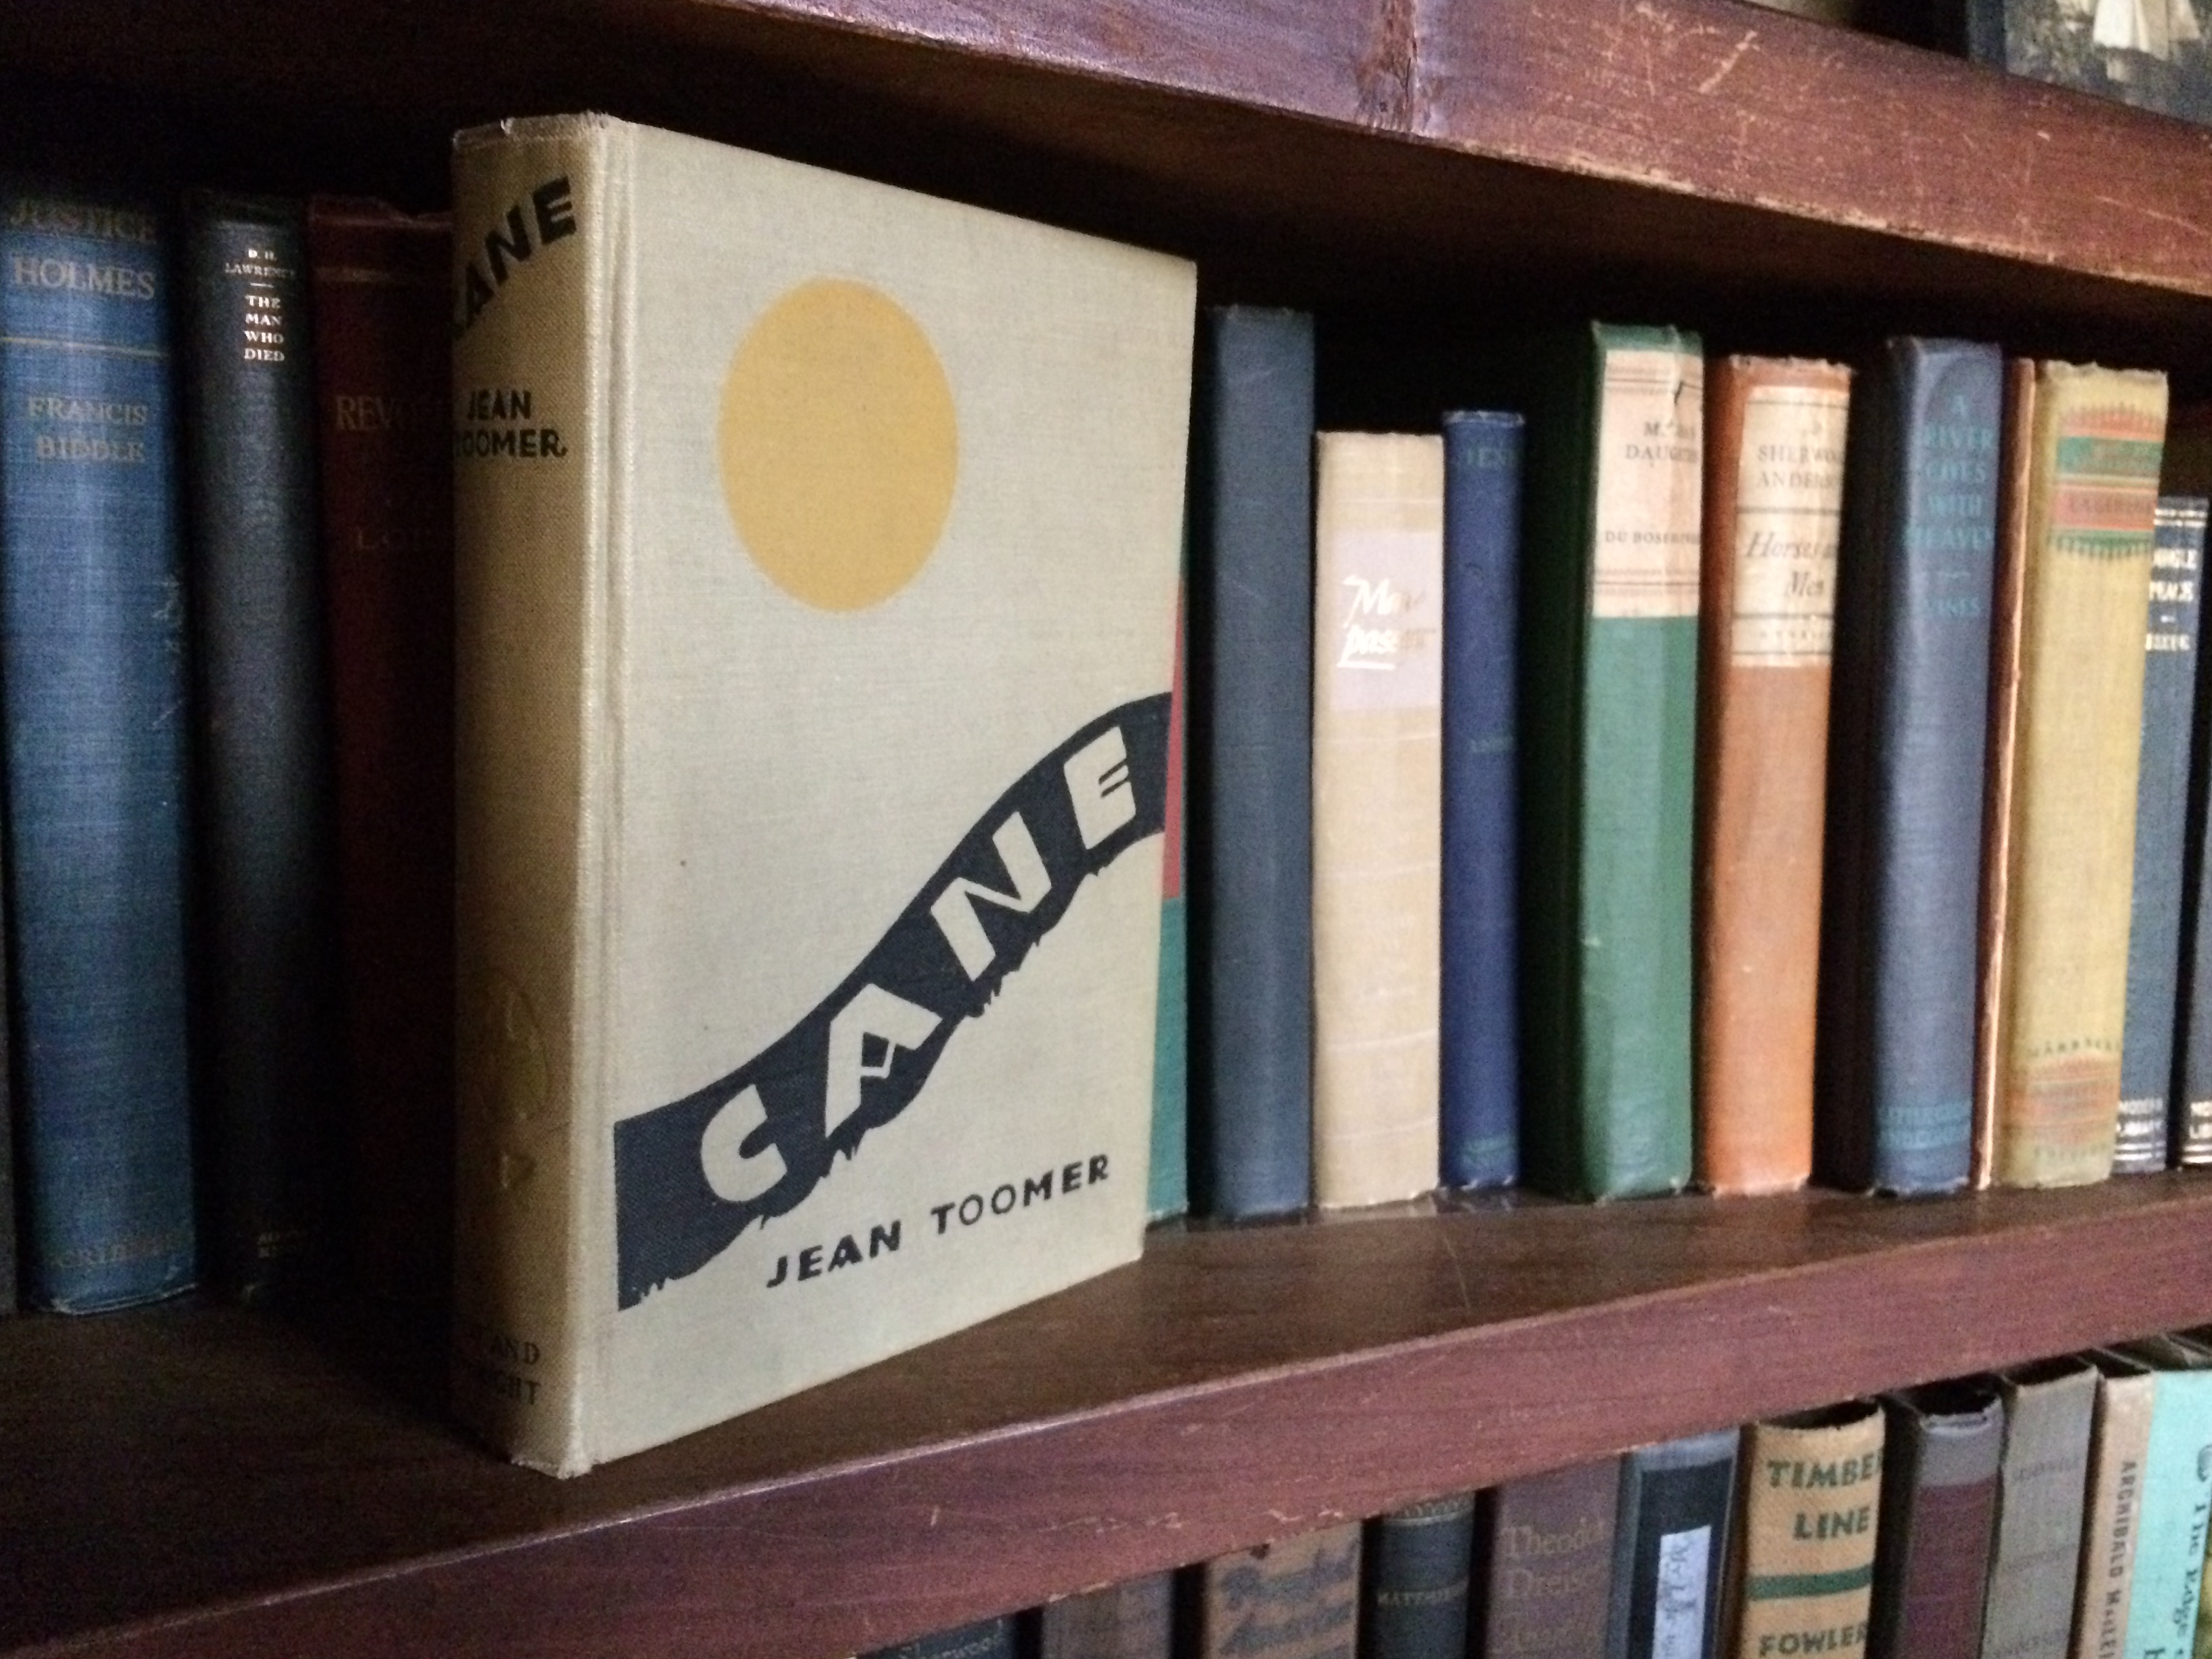 Esherick's copy of Cane, published in 1923.